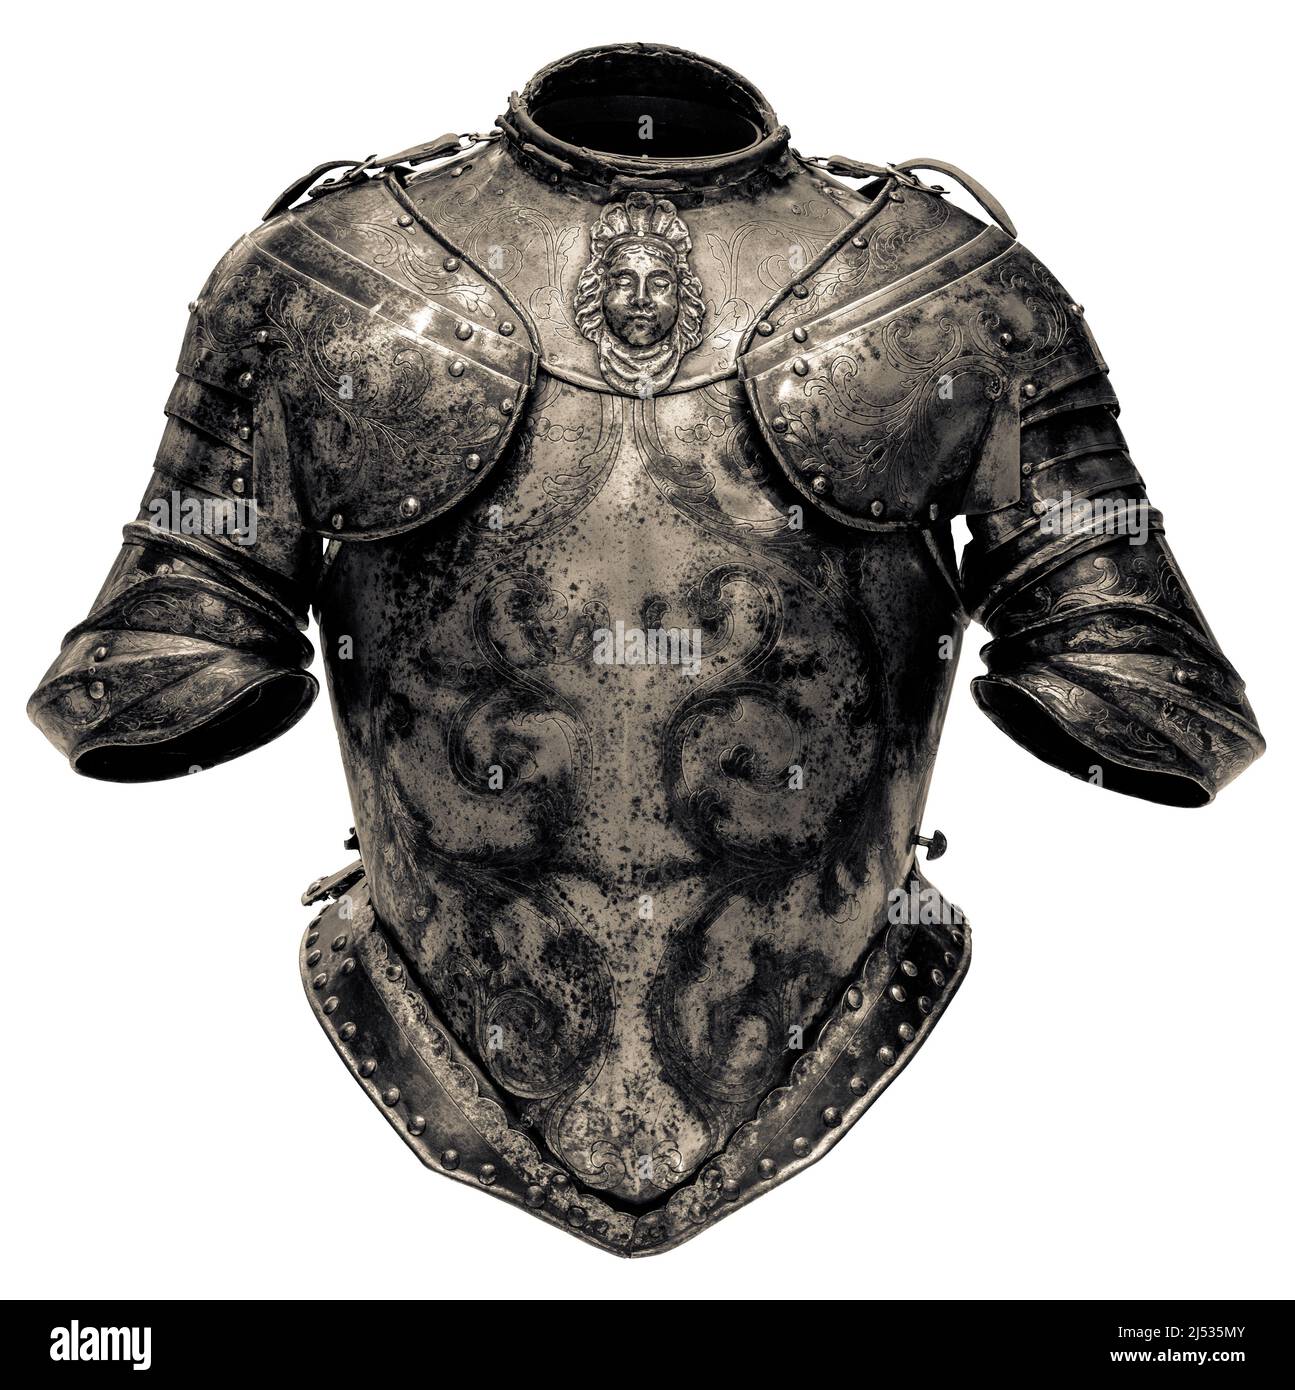 The Torso Section, Or Cuirass, Of A Medieval Suit Of Armor, Isolated On A White Background Stock Photo